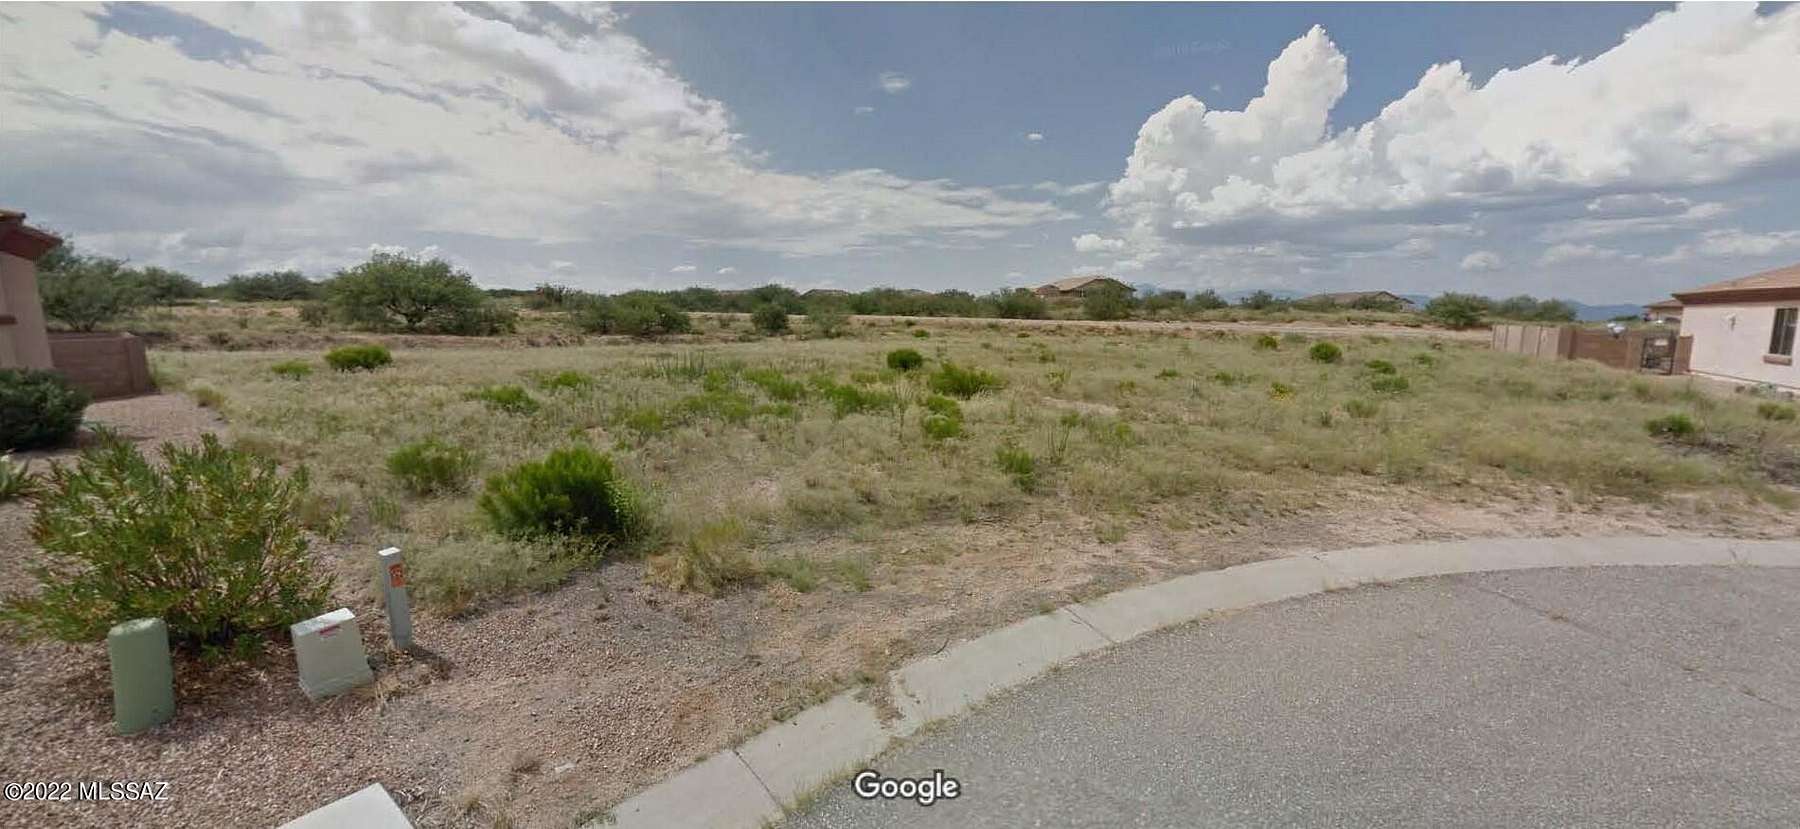 0.73 Acres of Mixed-Use Land for Sale in Benson, Arizona